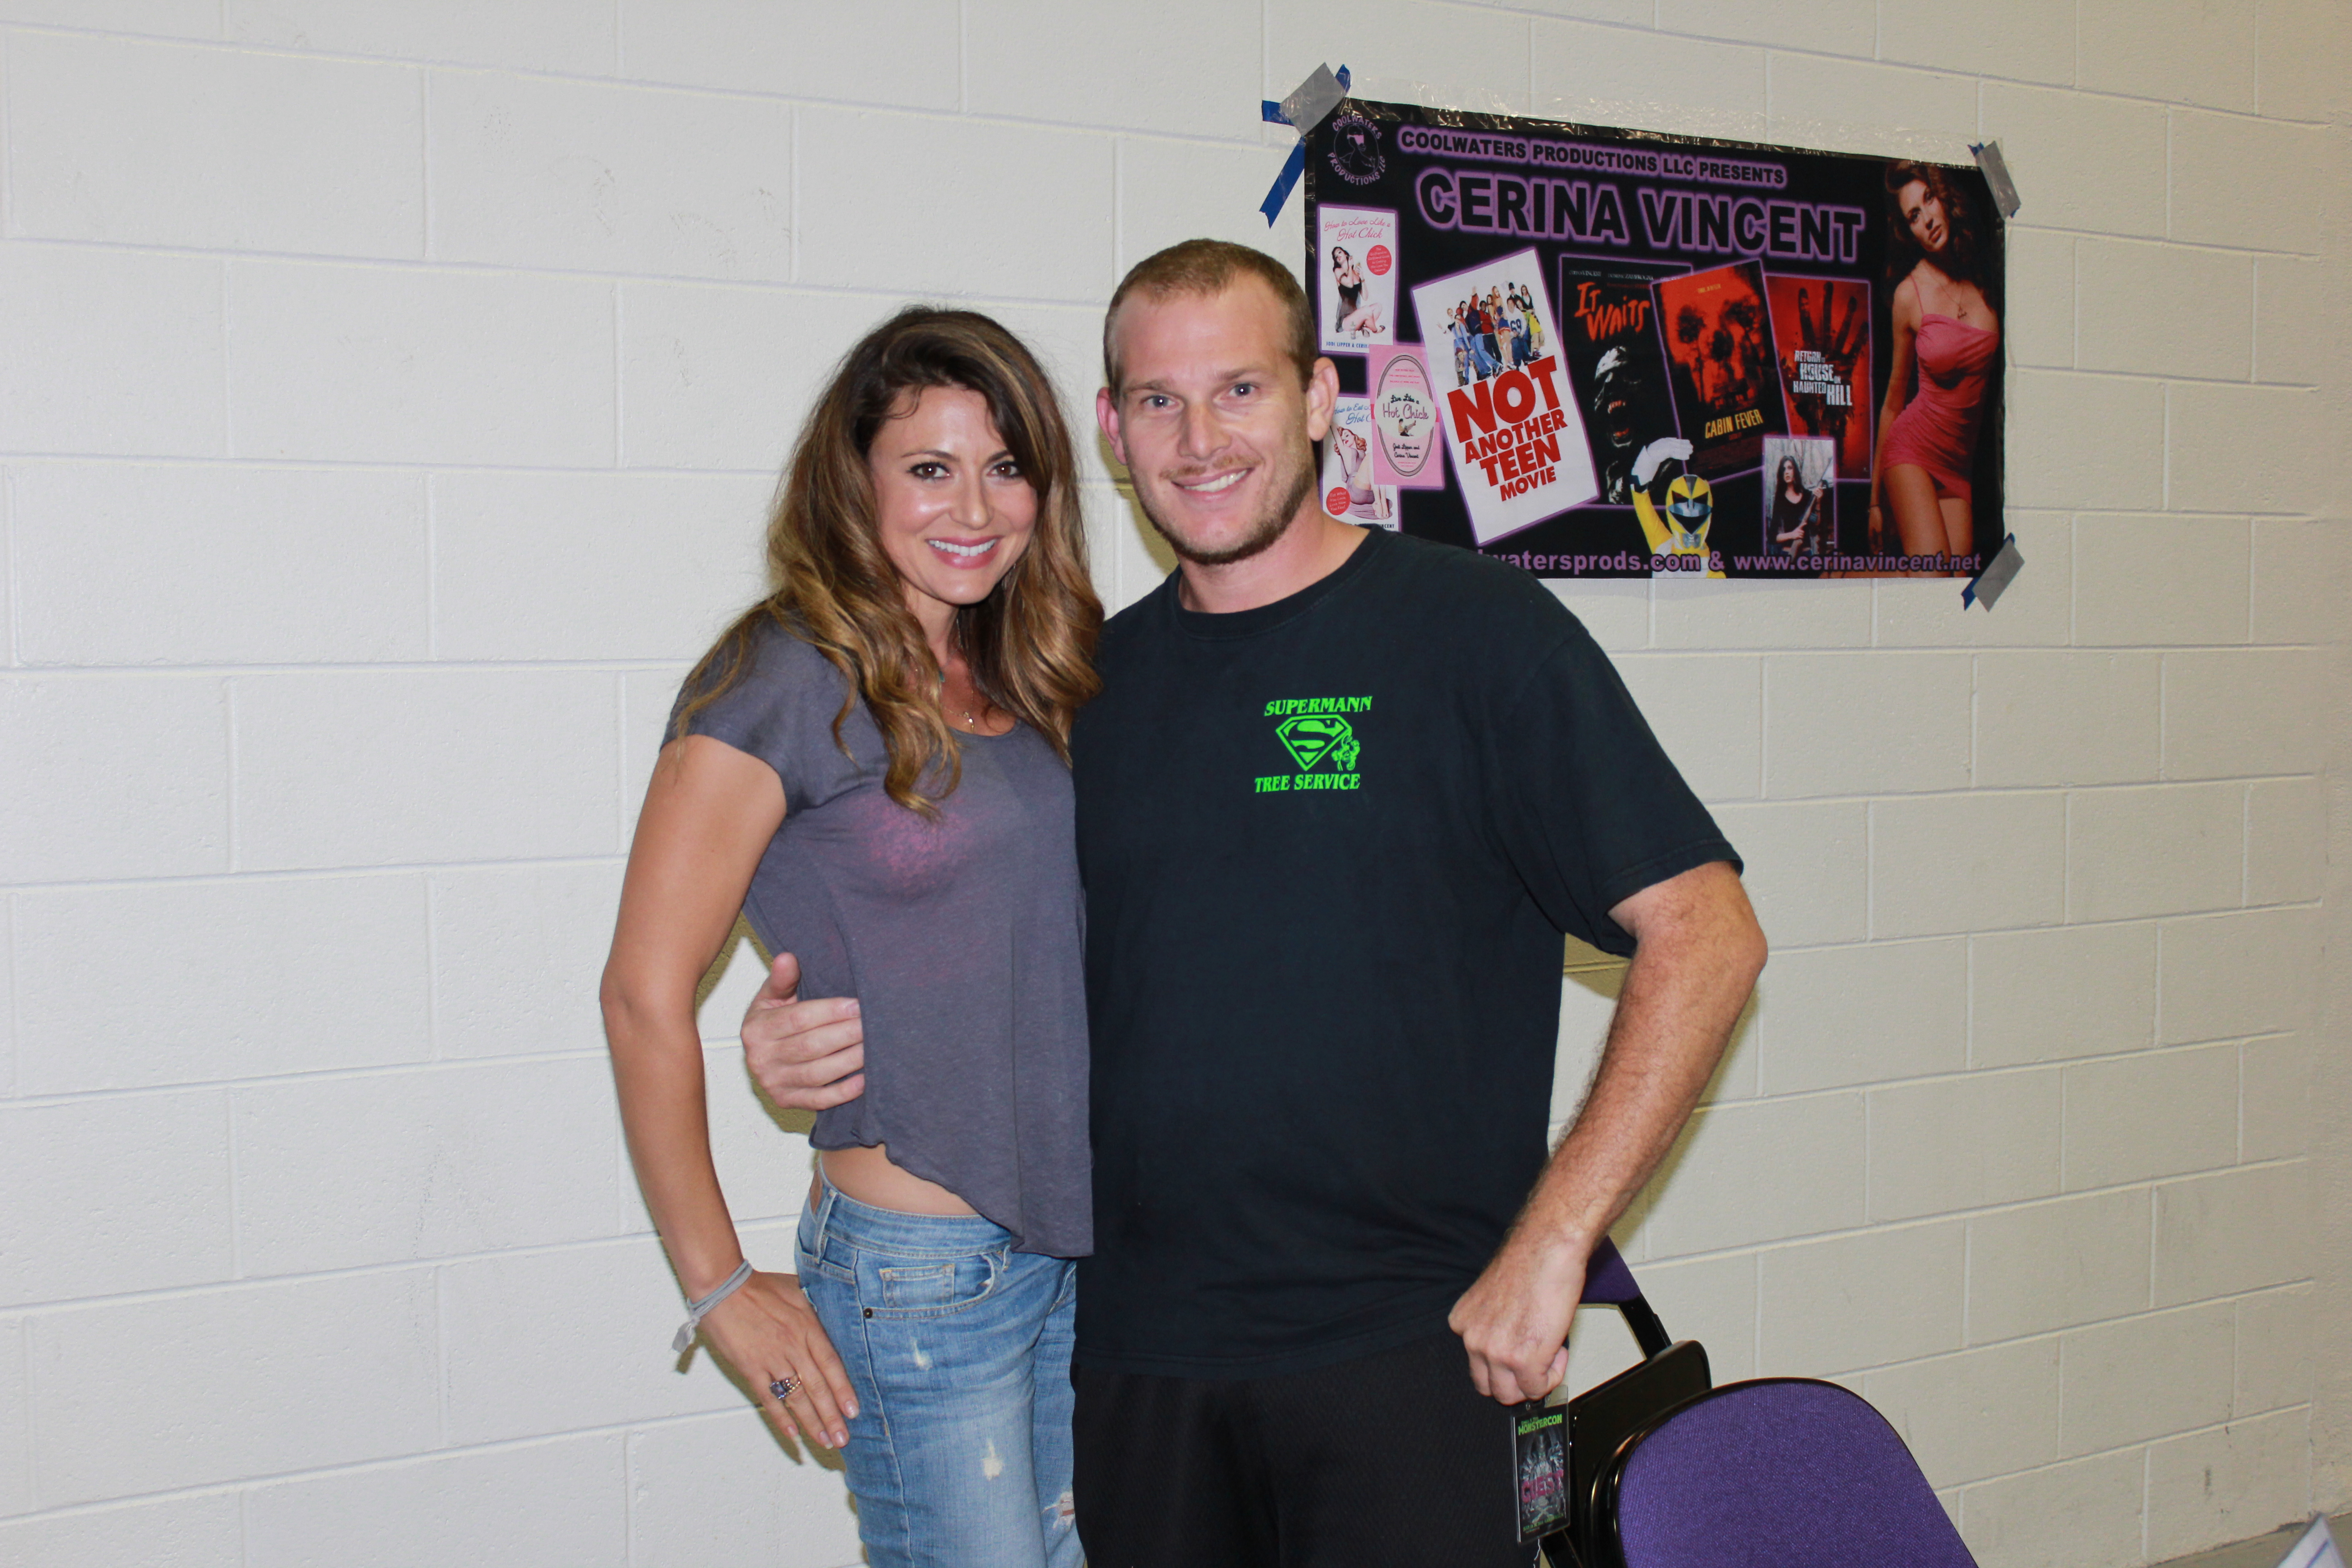 Cerina Vincent and Lumberjack at Xcon Comic Con in Myrtle Beach, SC.